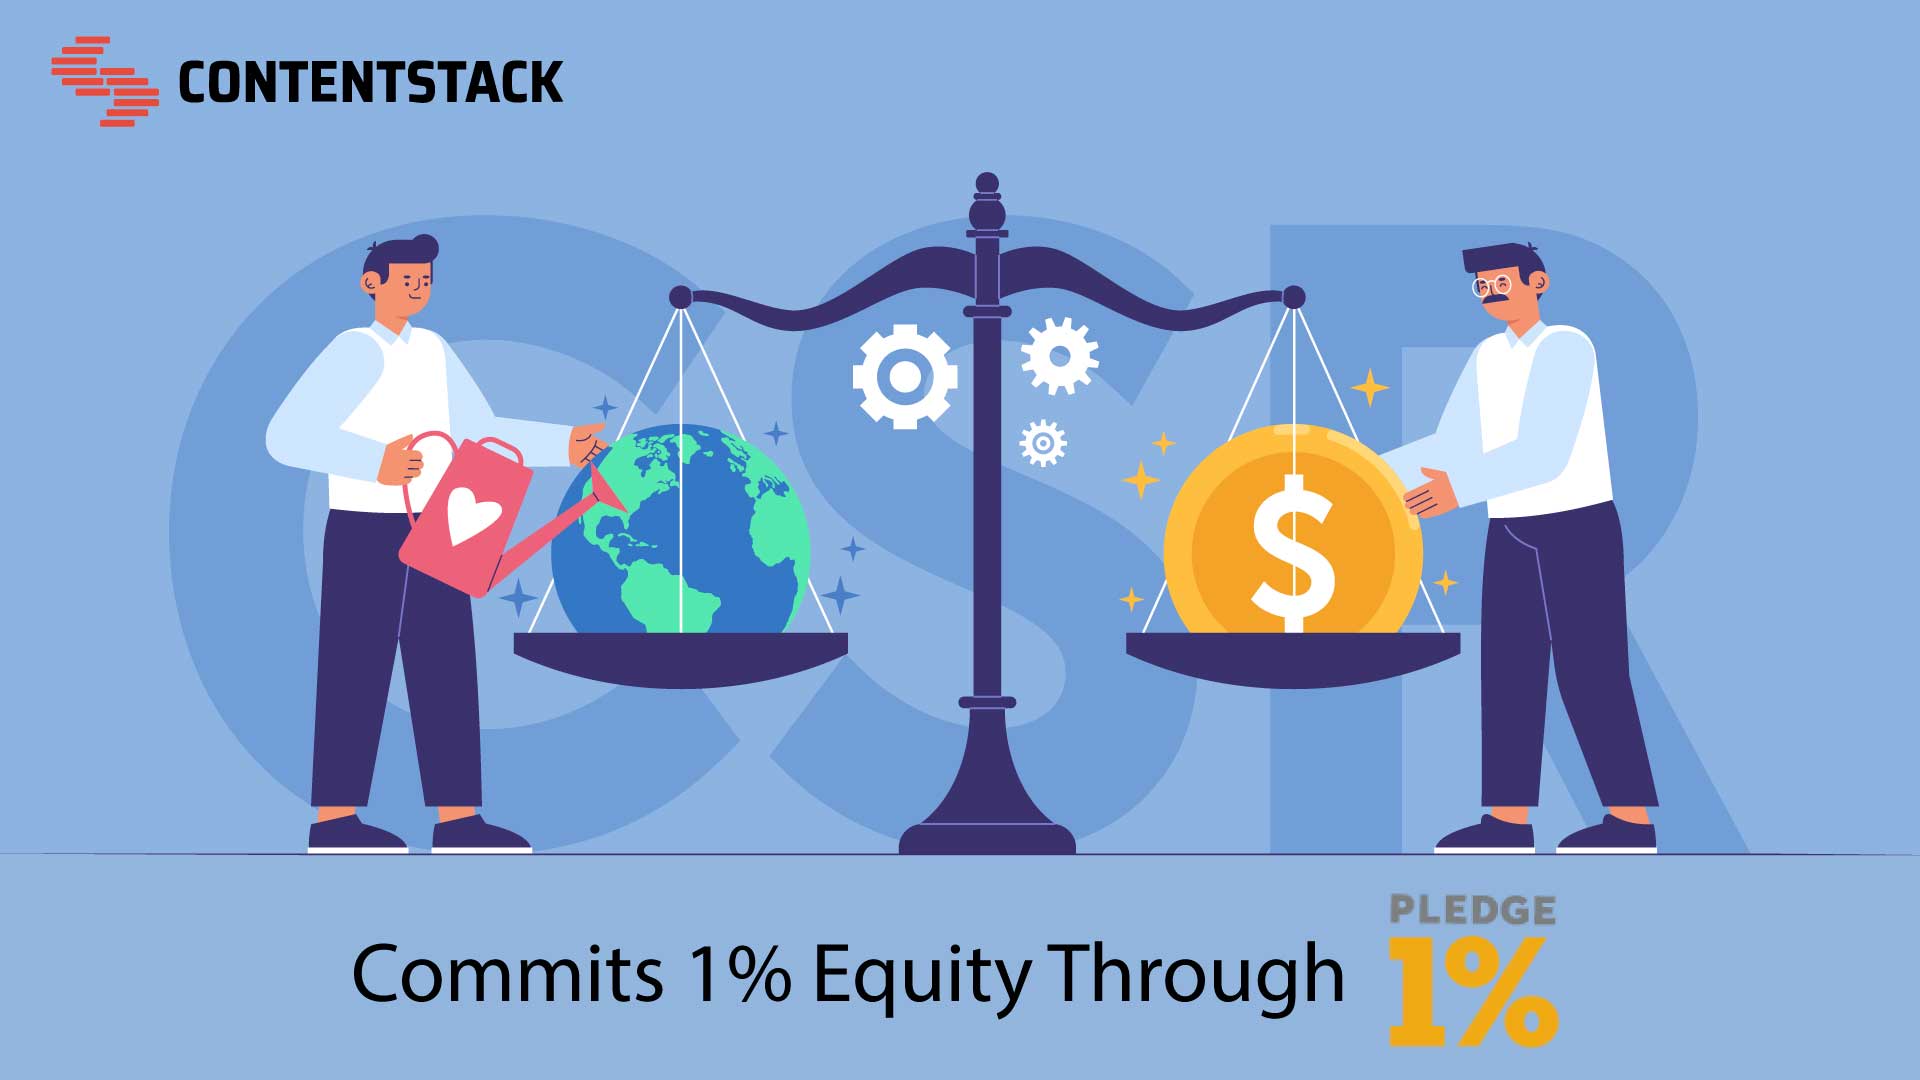 Contentstack Commits Equity to Fund Future CSR Initiatives through Pledge 1%